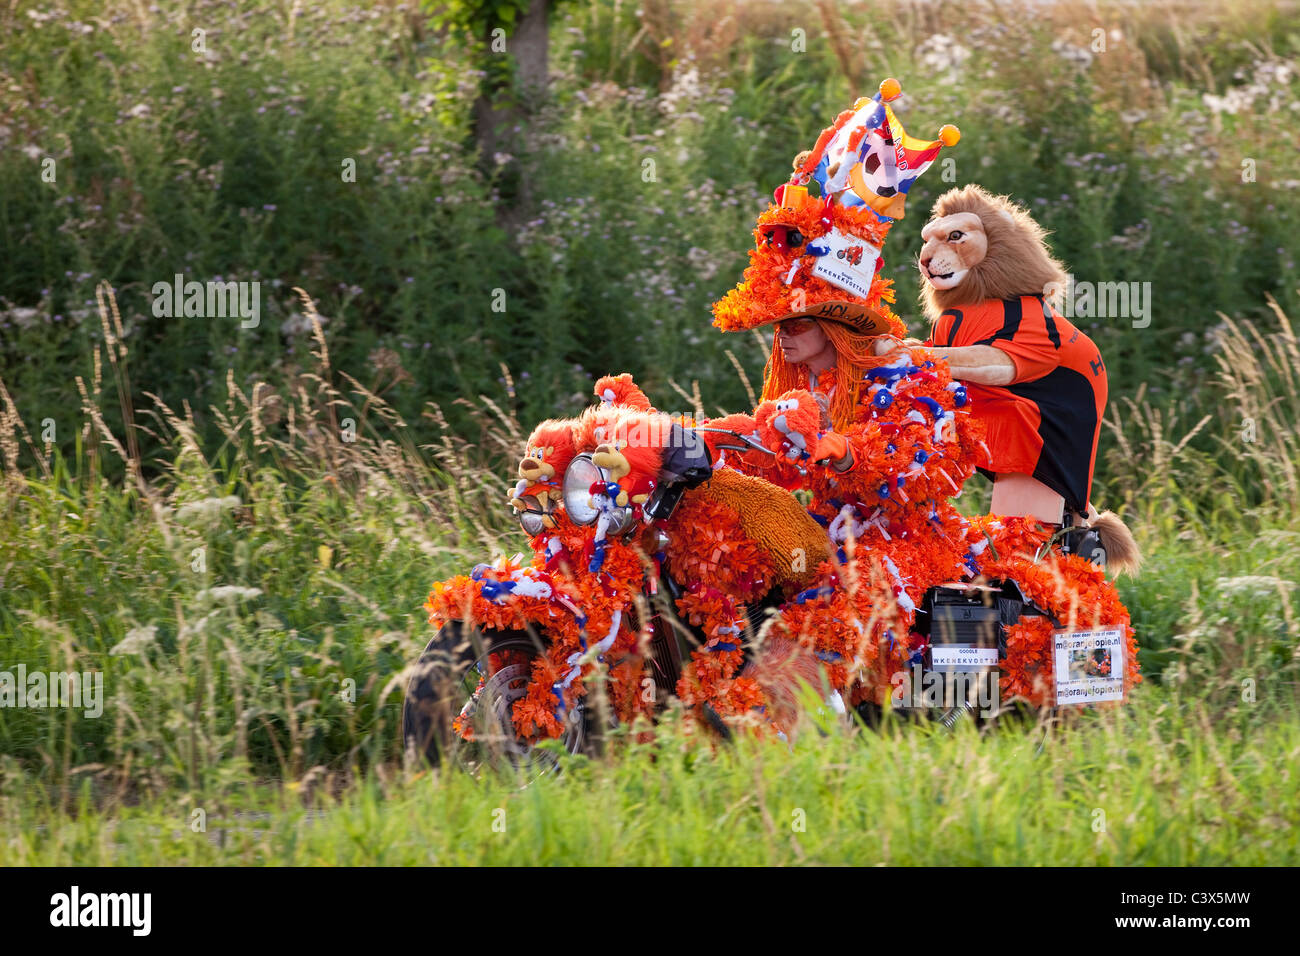 The Netherlands, World Cup Football July 2010. Motorcyclist decorated in orange, Oranje Jopie, supporter Dutch national team. Stock Photo